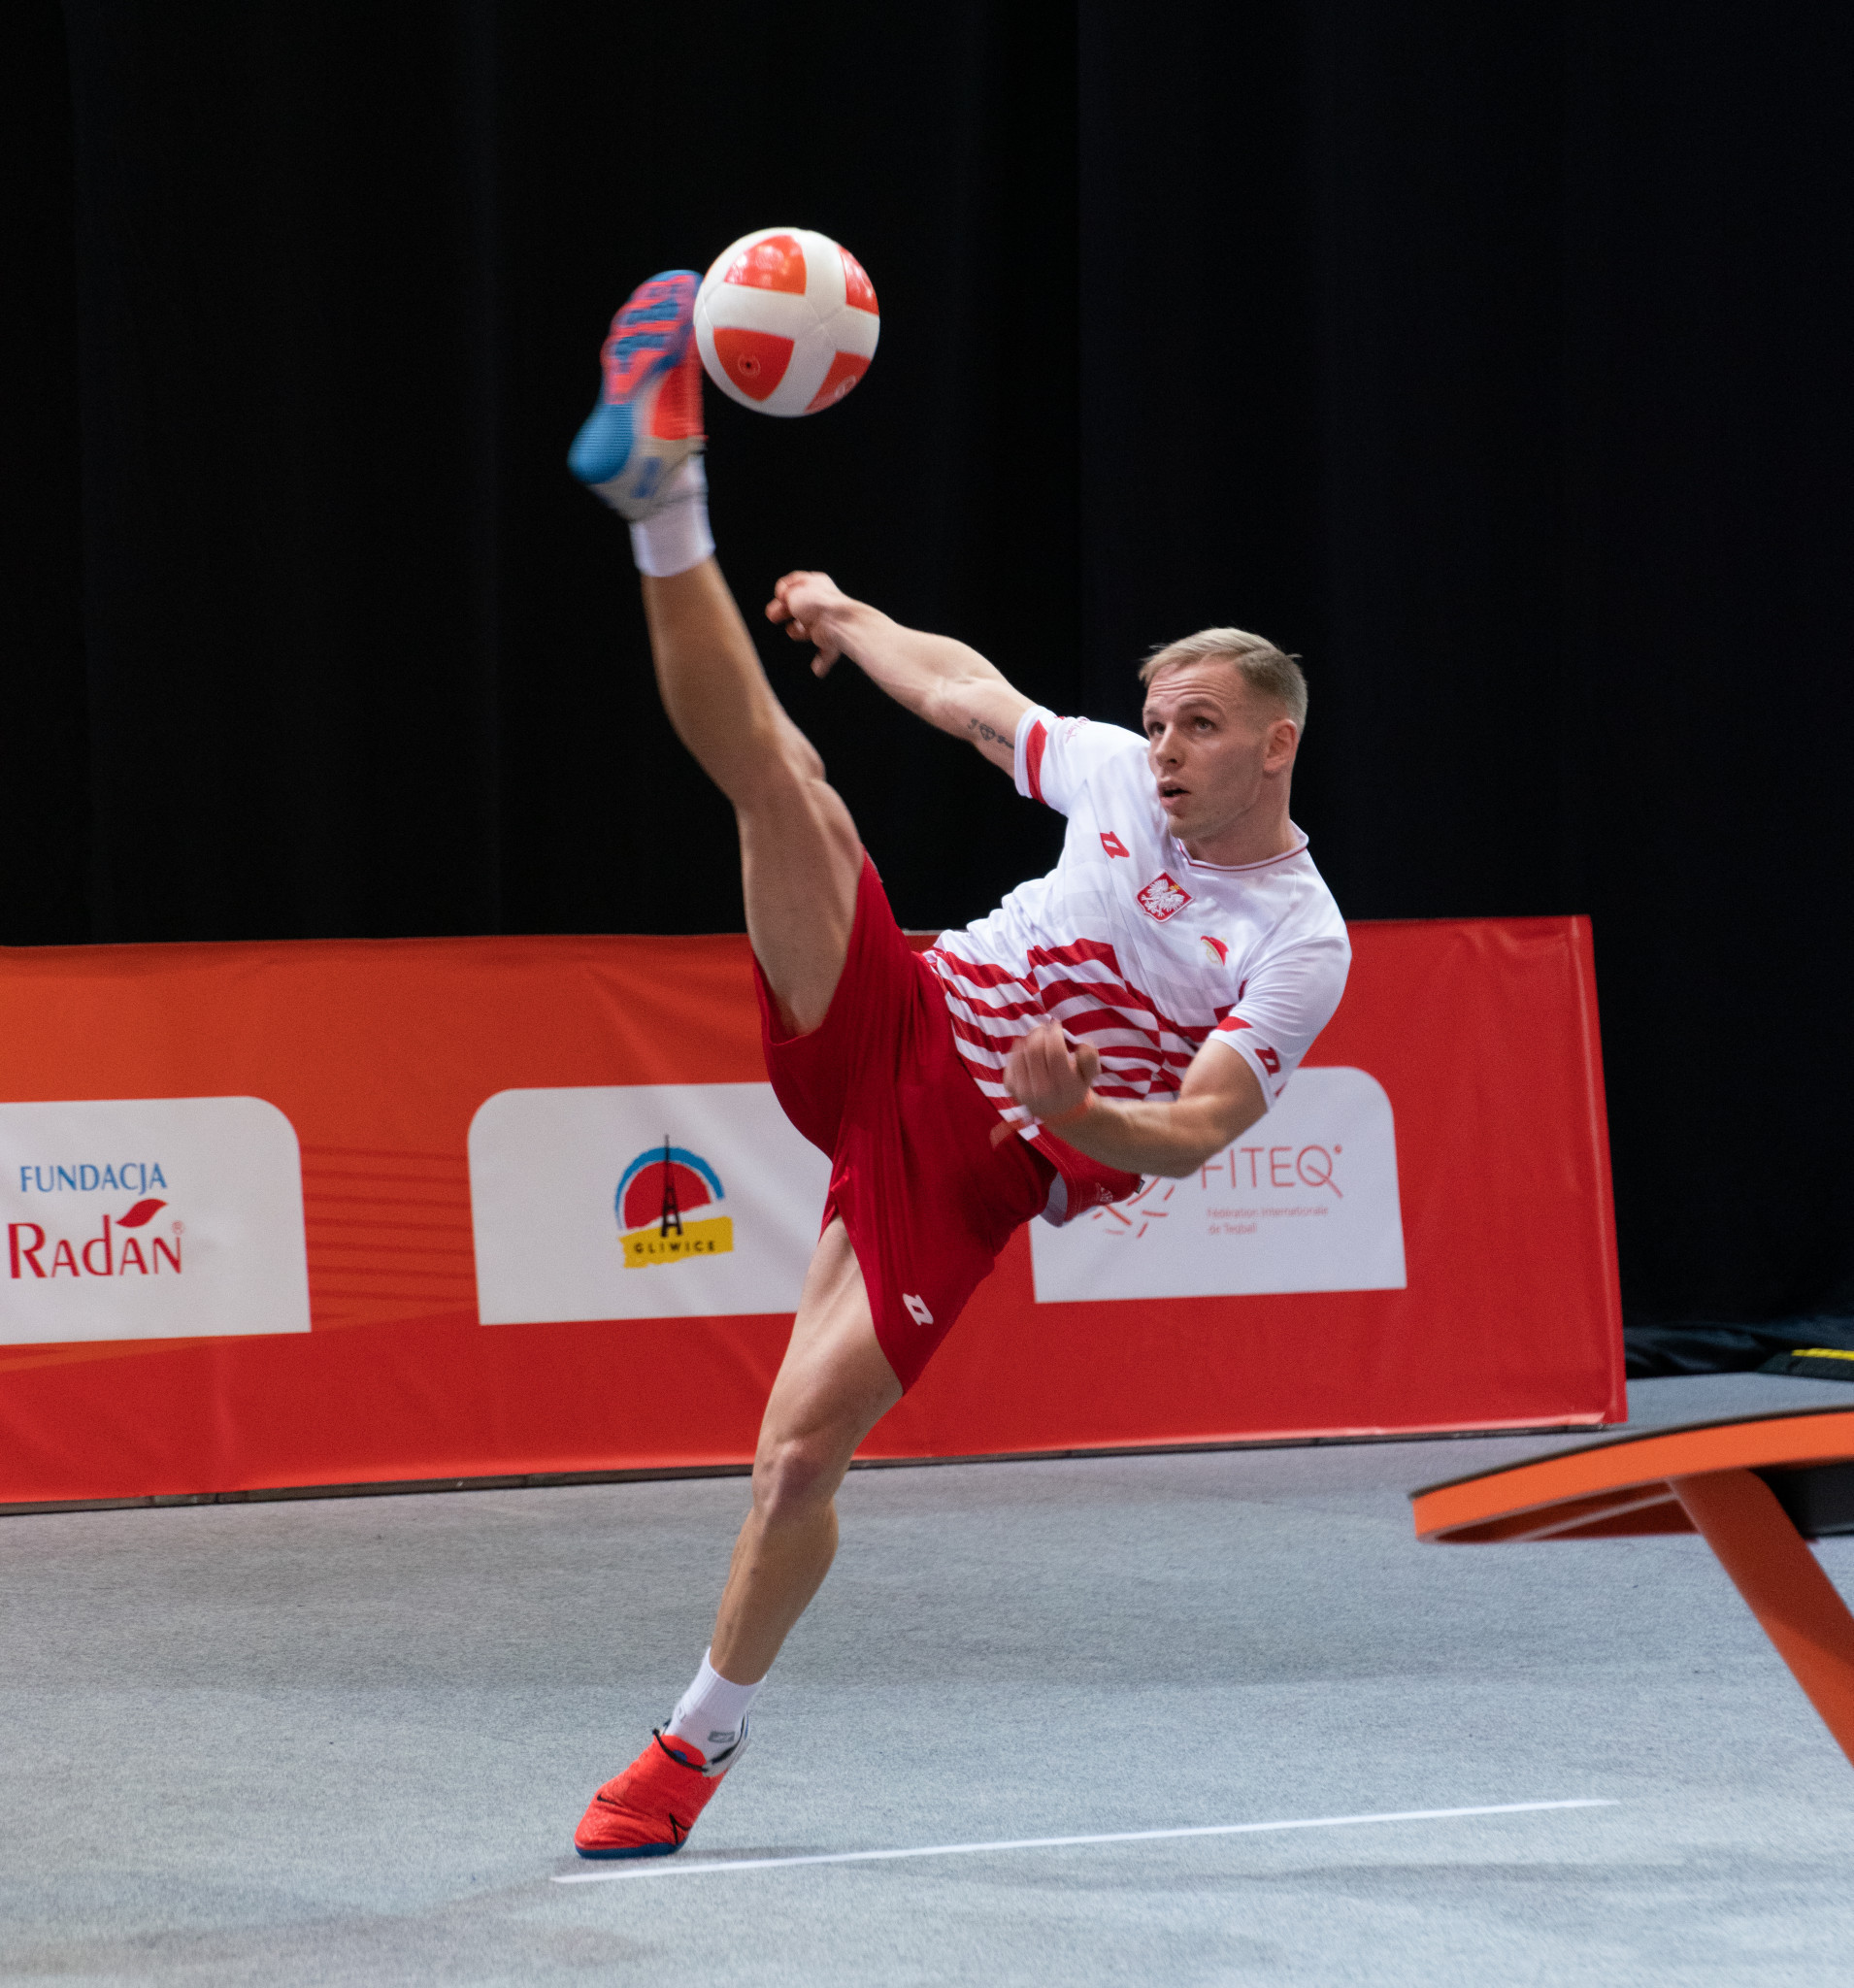 Adrian Duszak has been selected as the men's singles representative in Poland's team for the Teqball World Championships ©FITEQ